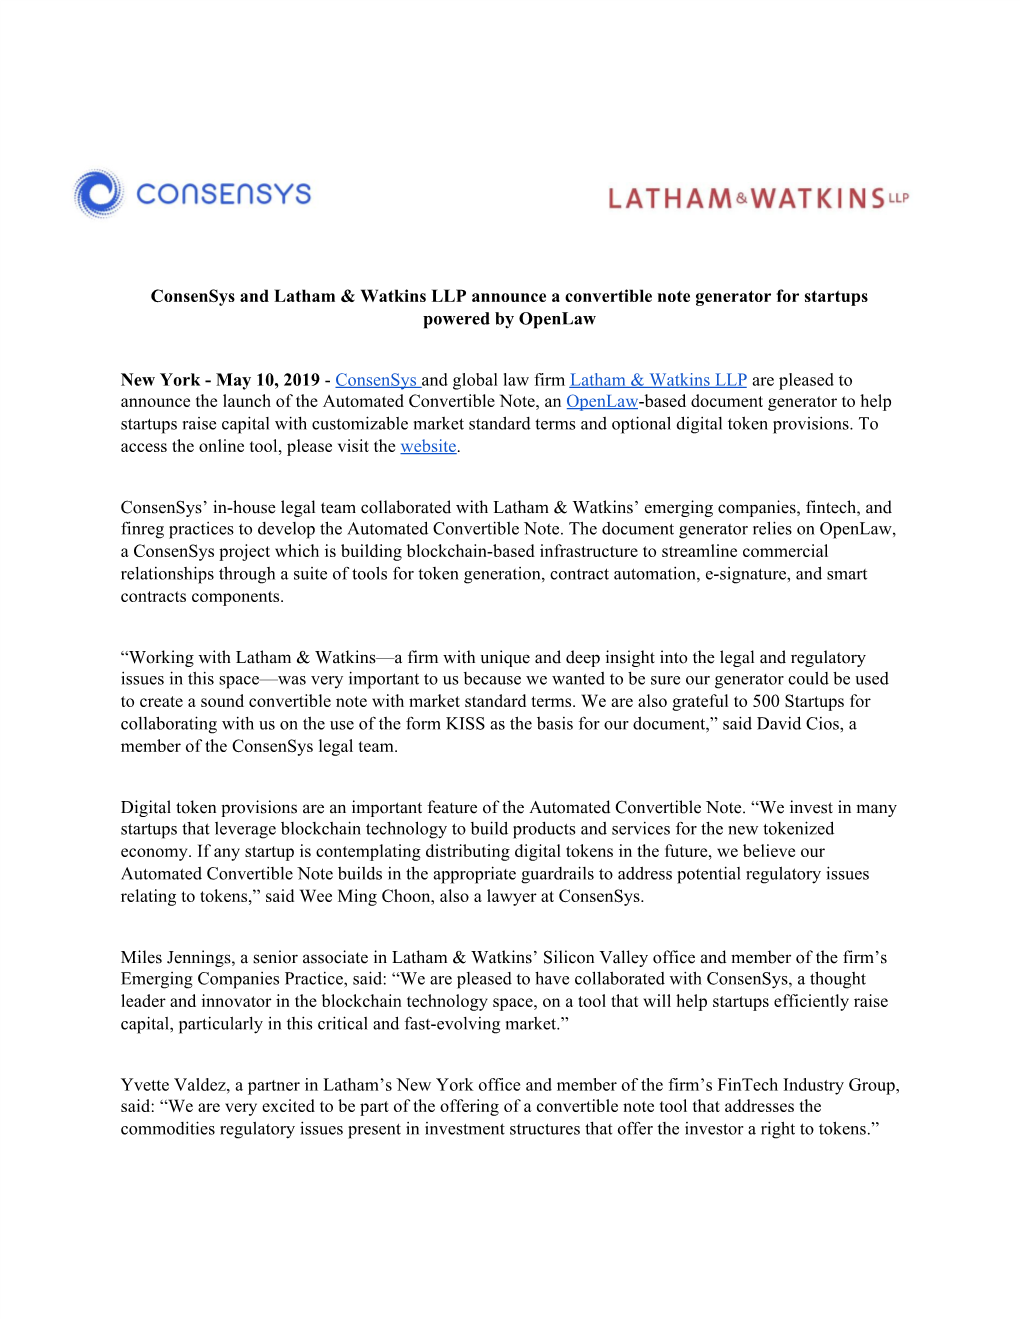 Consensys and Latham & Watkins LLP Announce a Convertible Note